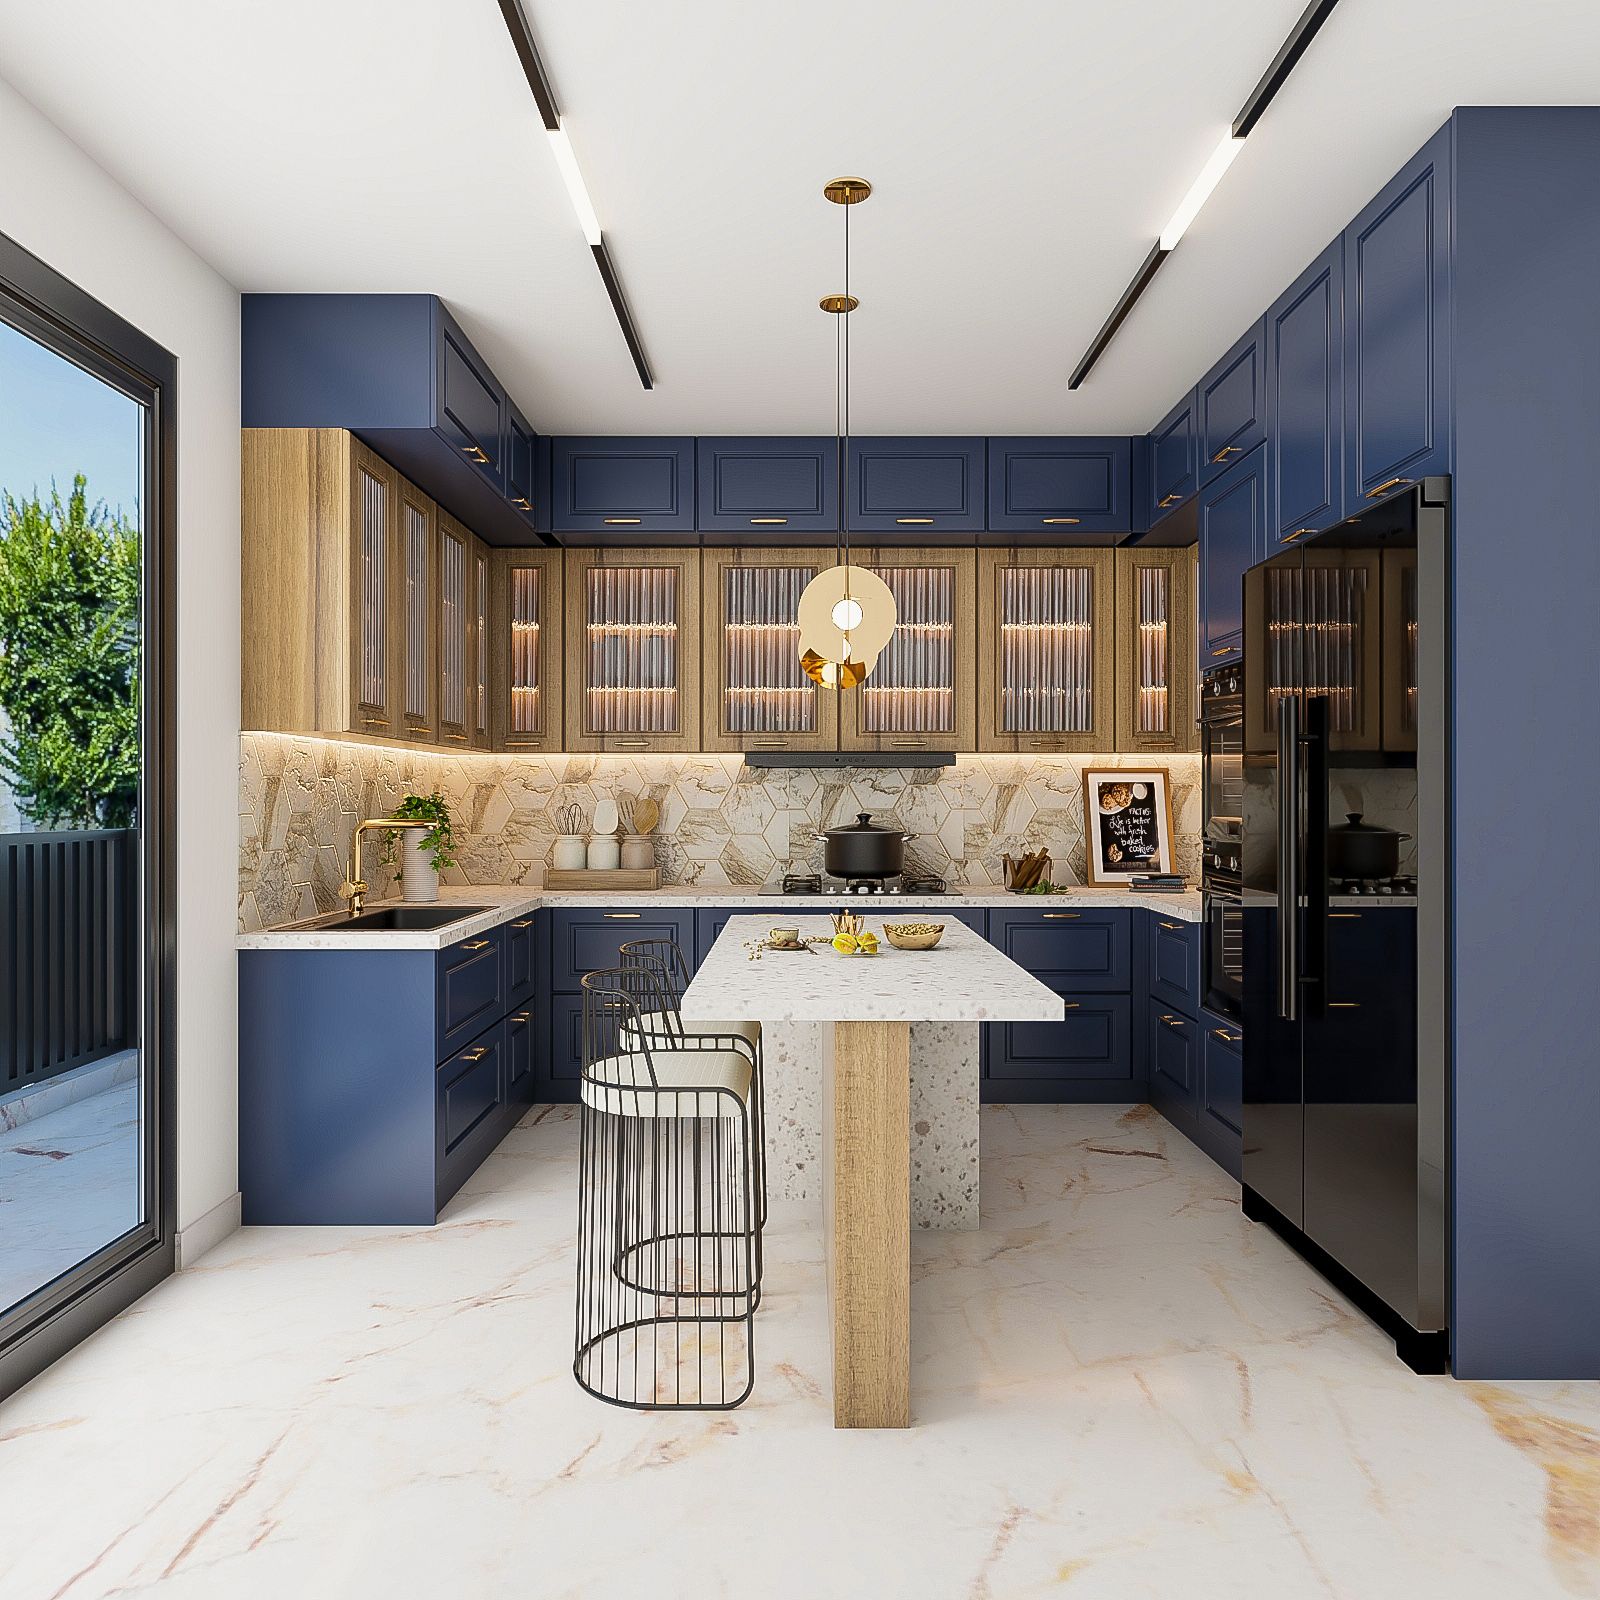 Classic Dark Blue And Wood U Shaped Ktchen Island Design With Frosted Shutters